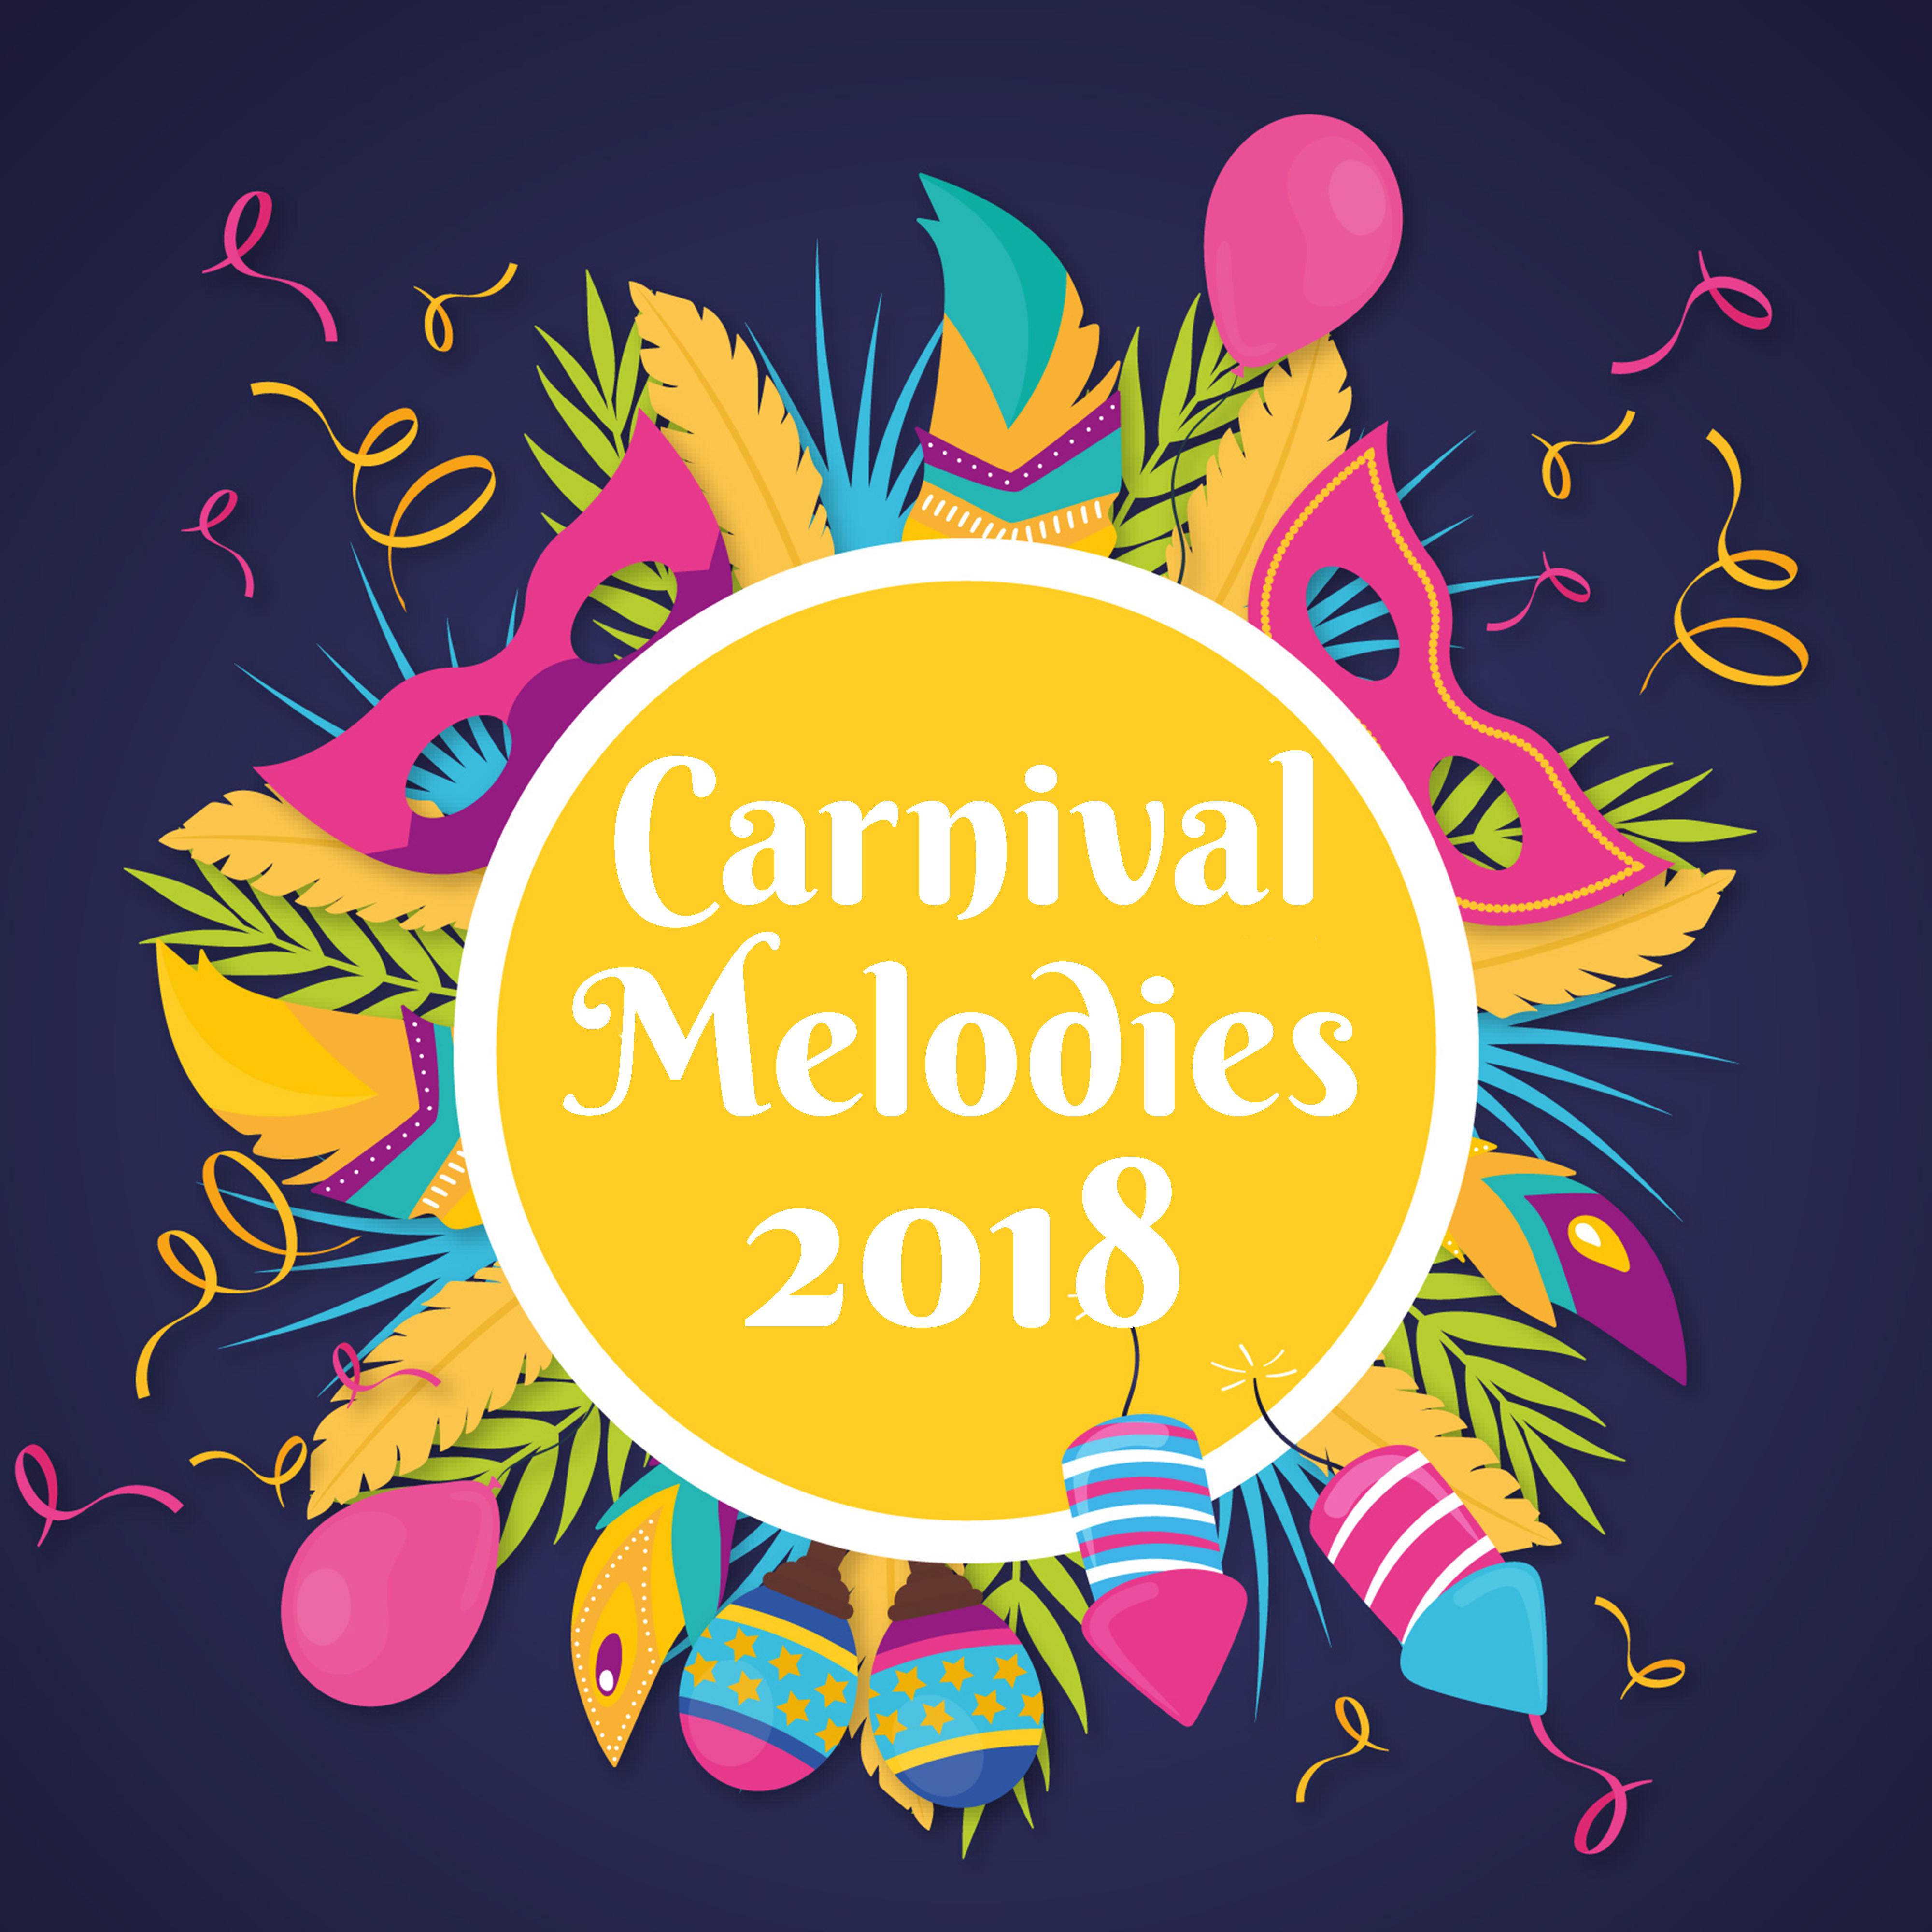 Carnival Melodies 2018